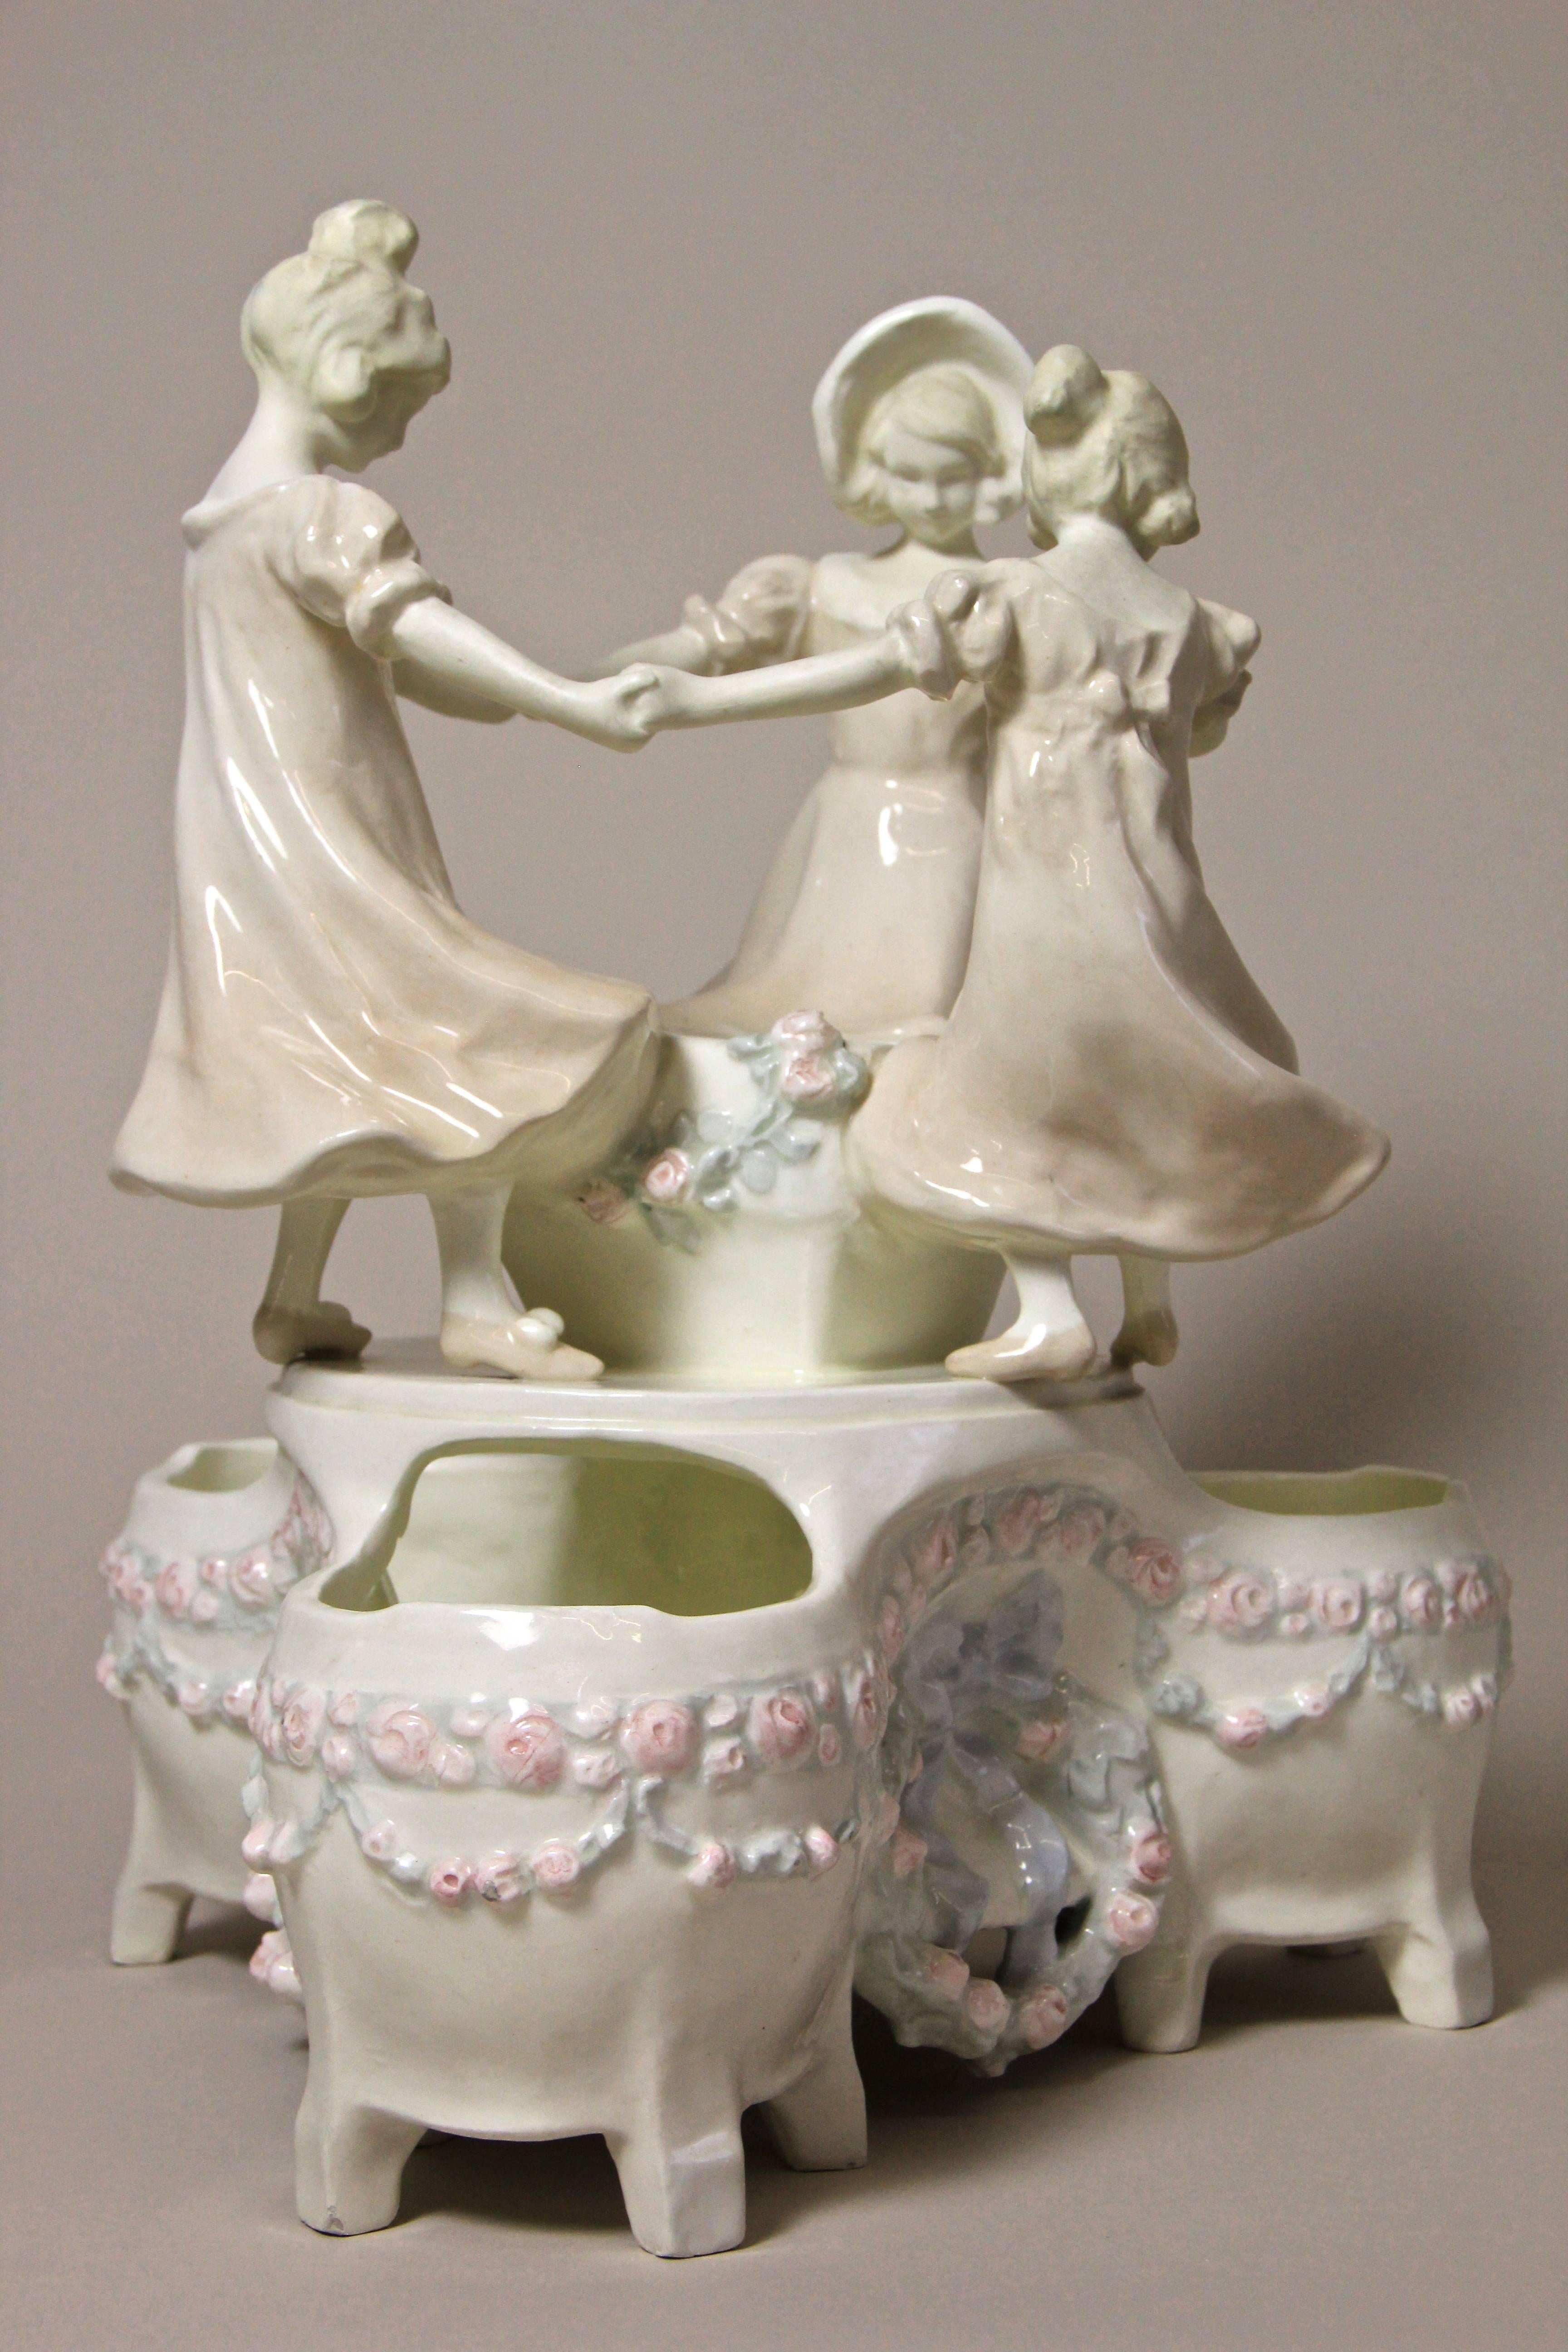 Impressive ceramic centrepiece by Schauer Ceramics, circa 1910. Schauer Ceramics was established 1900 in the beautiful city of Vienna and famous for its outstanding figurative items. This amazing centrepiece with three small bowls surrounded by